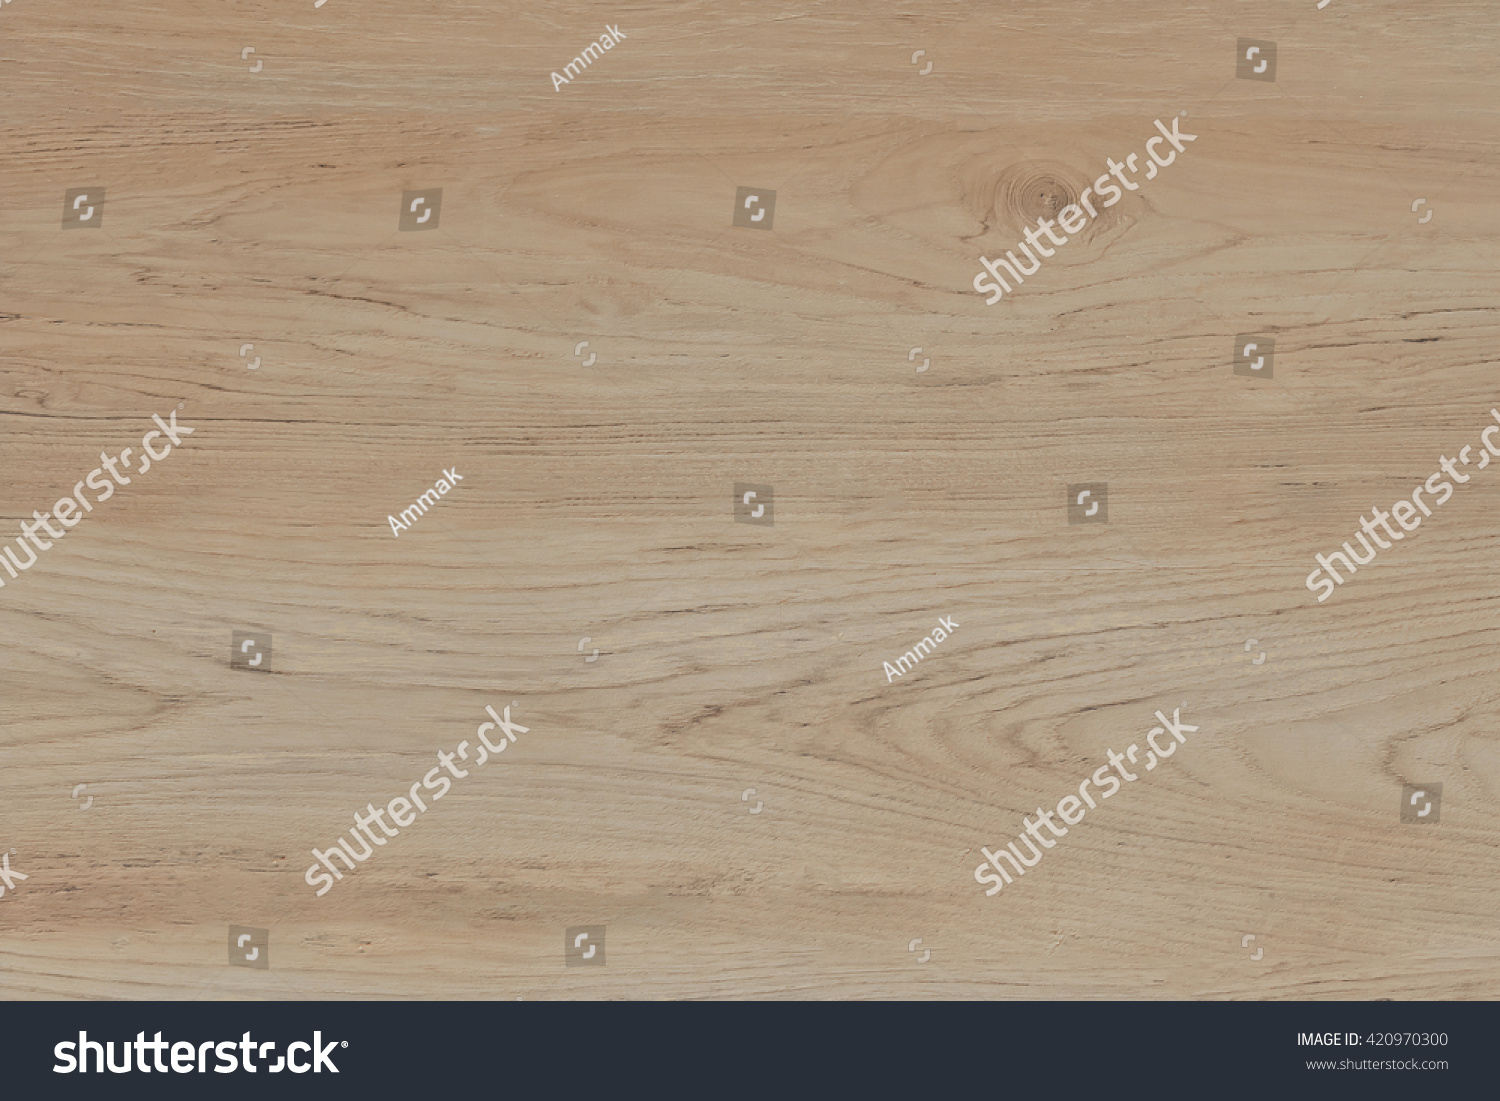 wood texture background #420970300